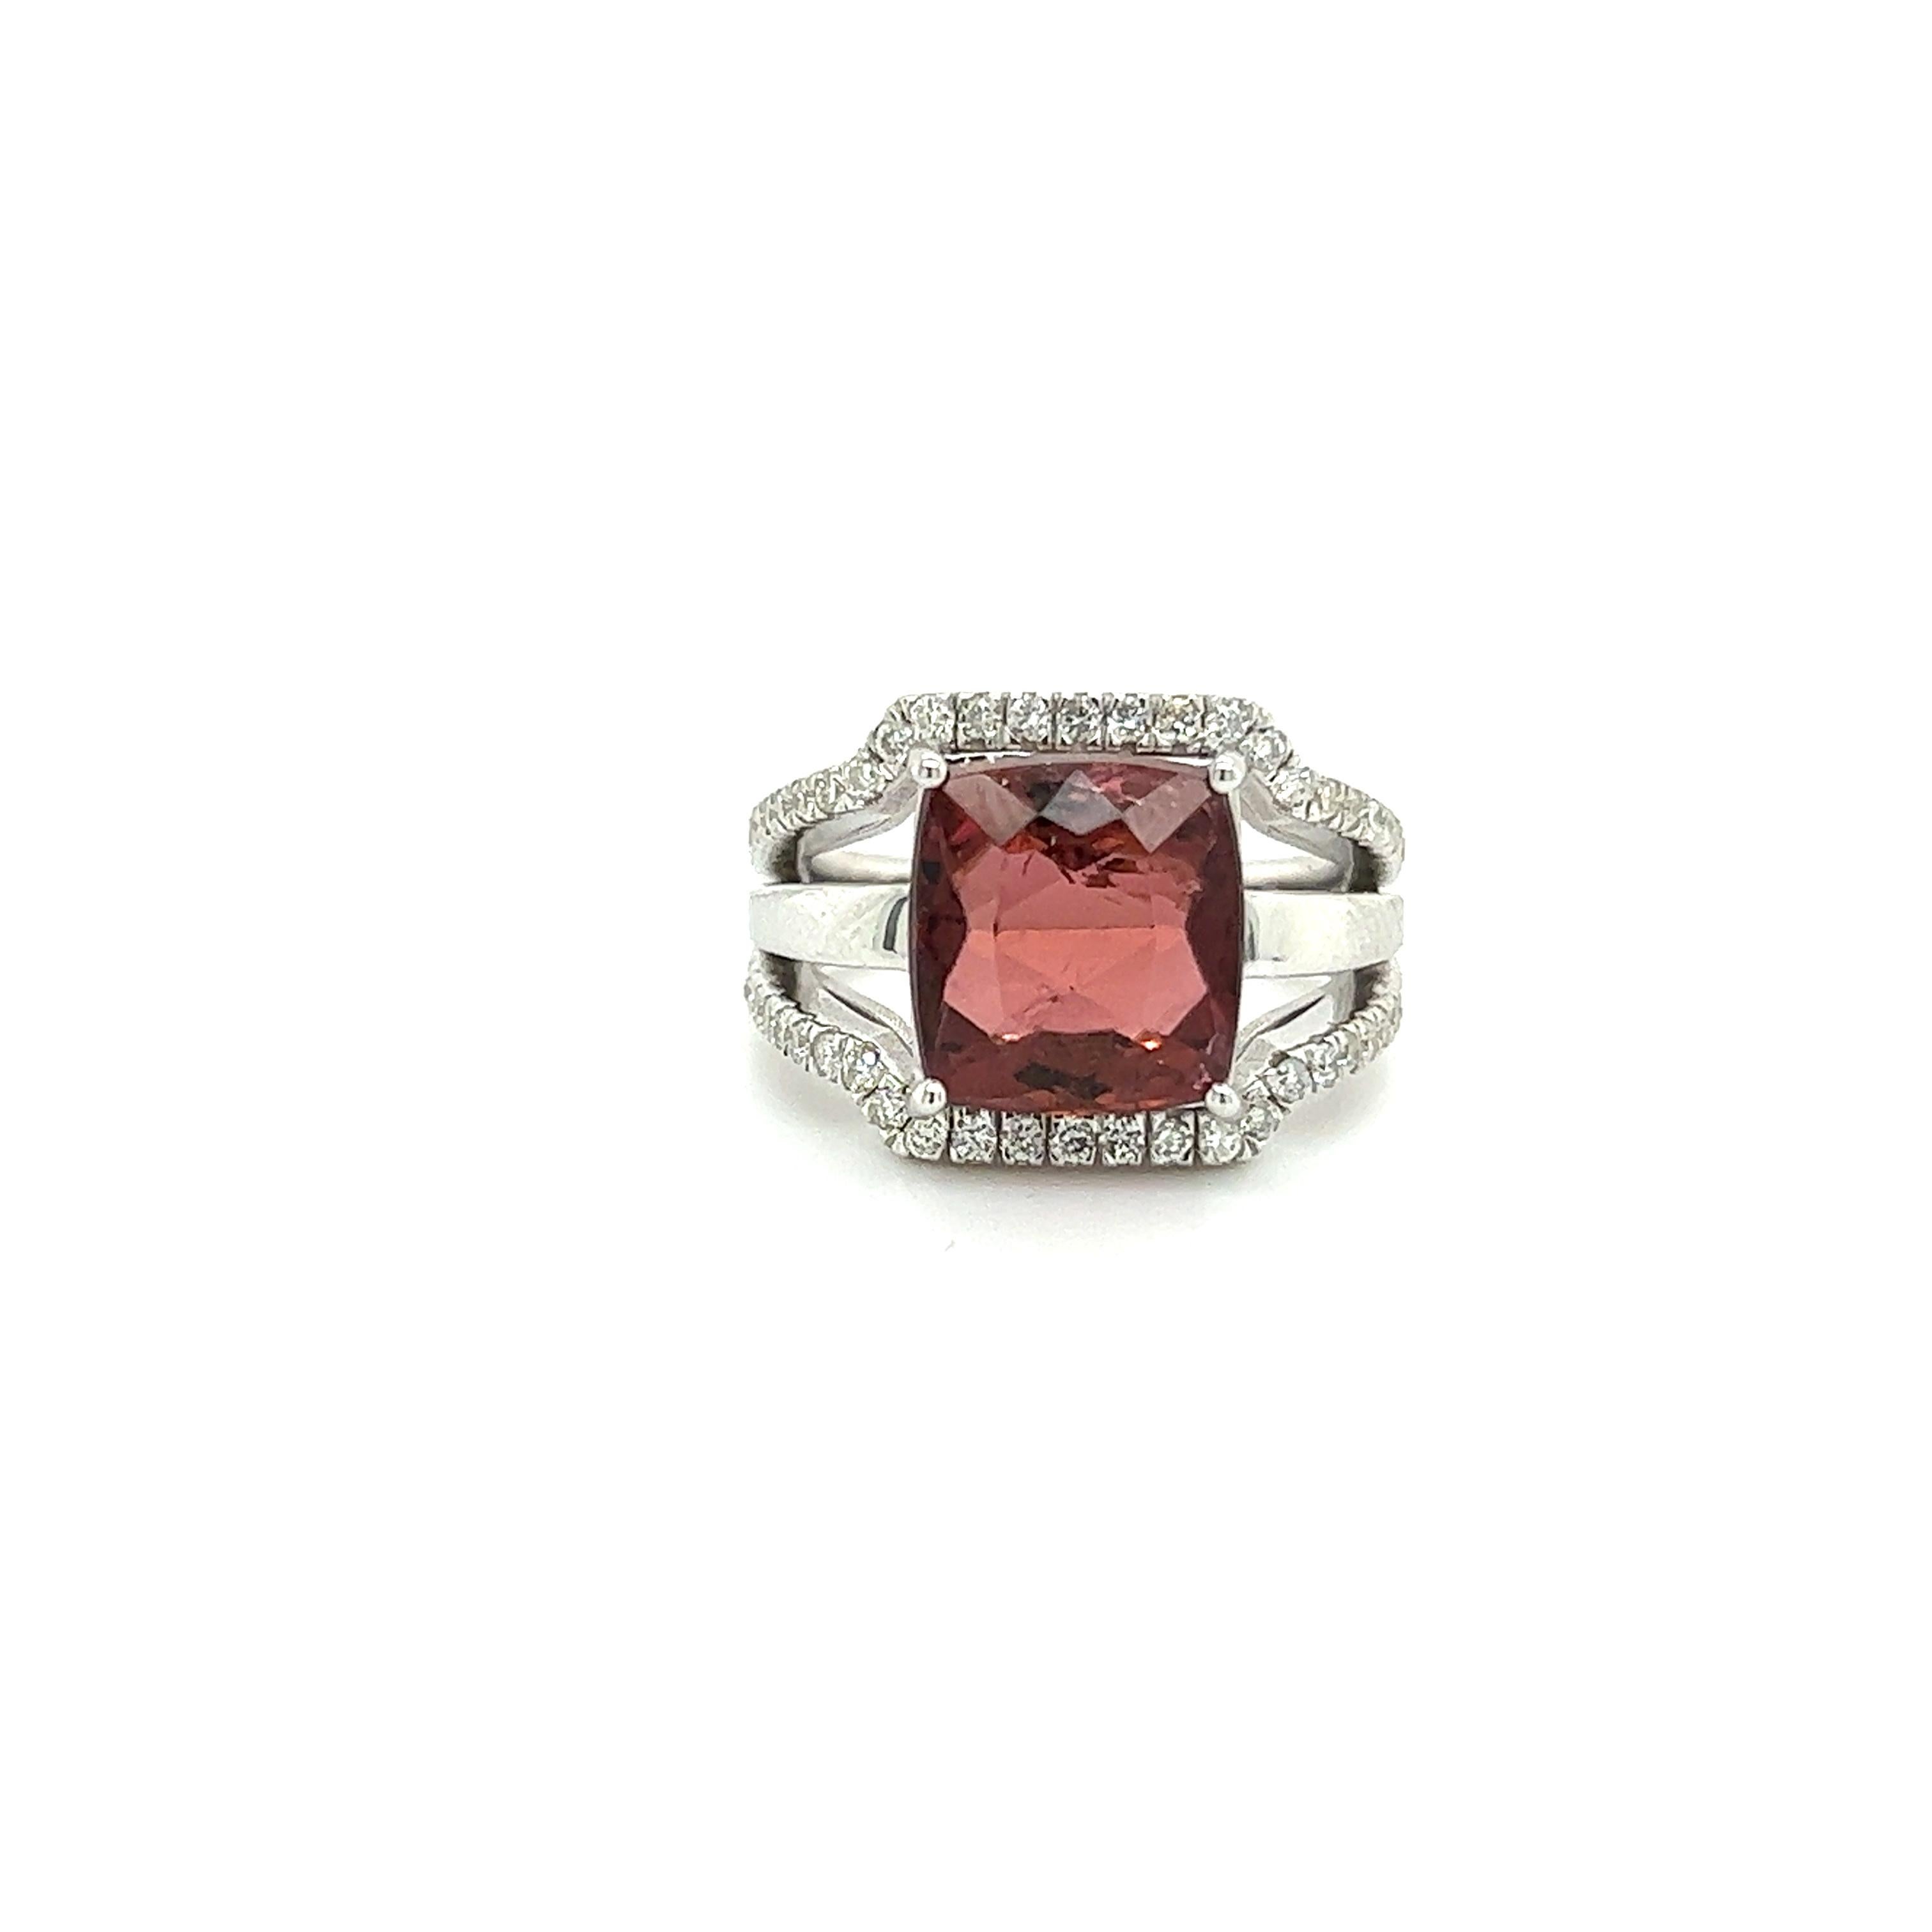 Natural Tourmaline Diamond Ring 6.5 14k White Gold 5.89 TCW Certified For Sale 2